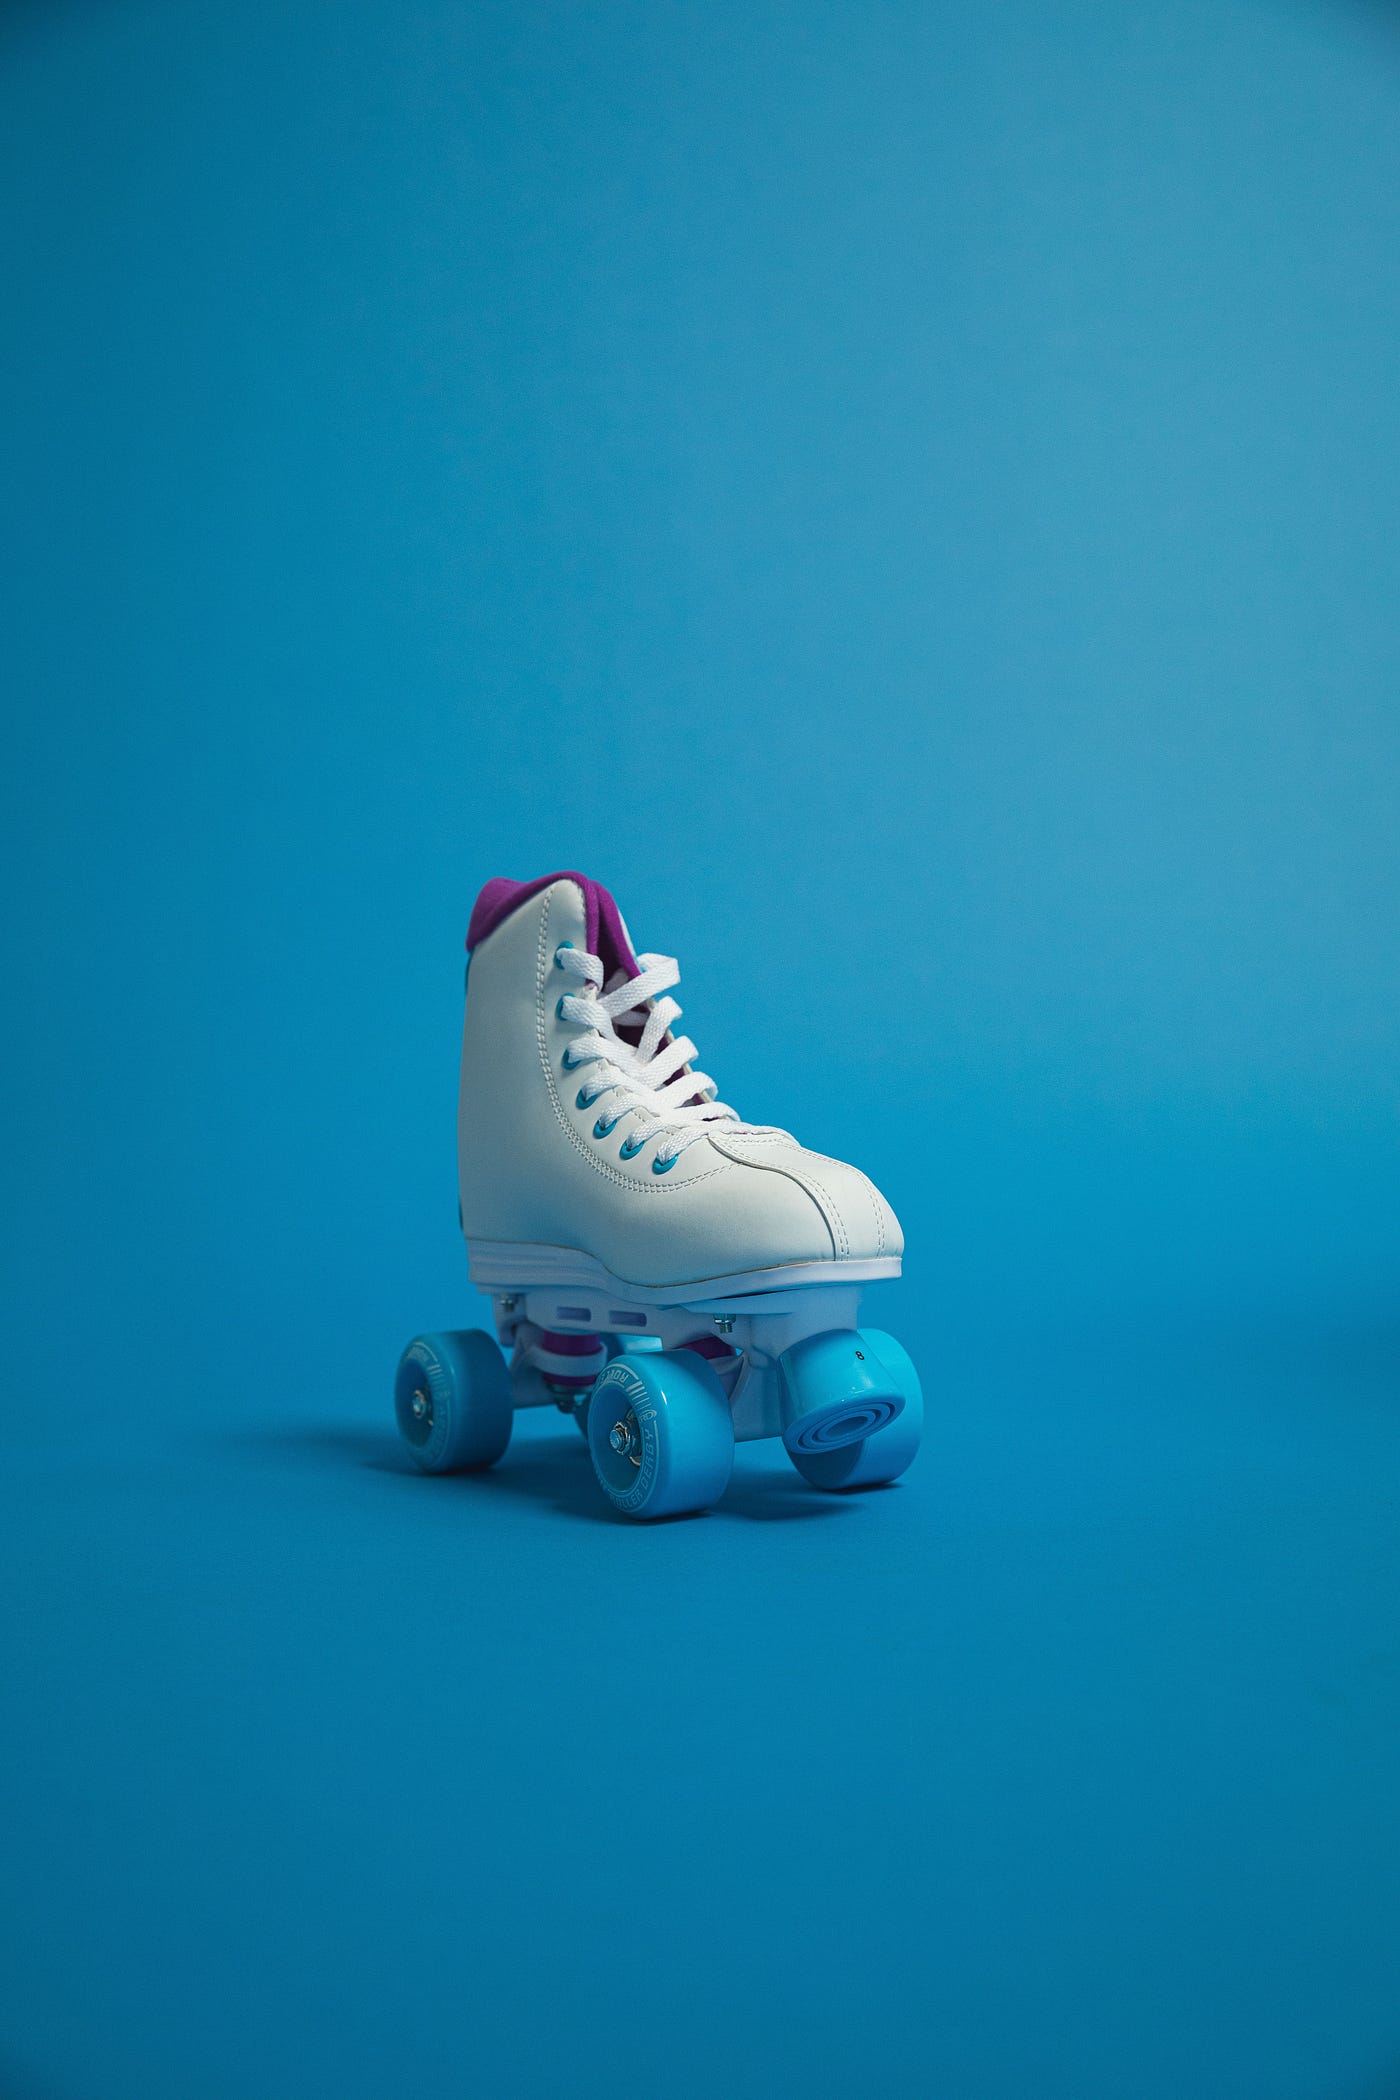 Roller Skating, Periods, Doom and Good Luck | by Natalie Forrest | Medium